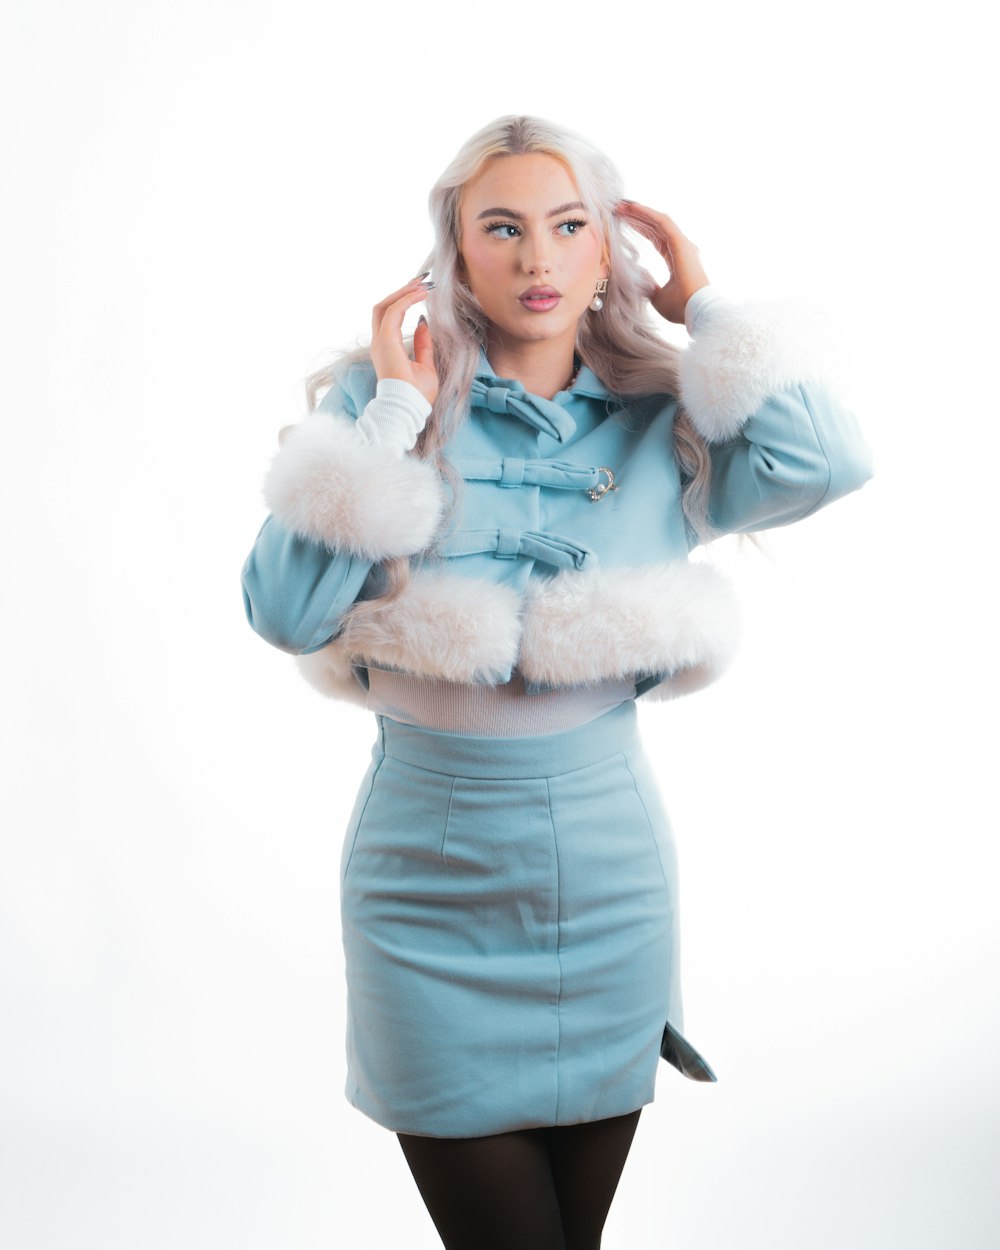 a woman in a blue dress and white fur stoler